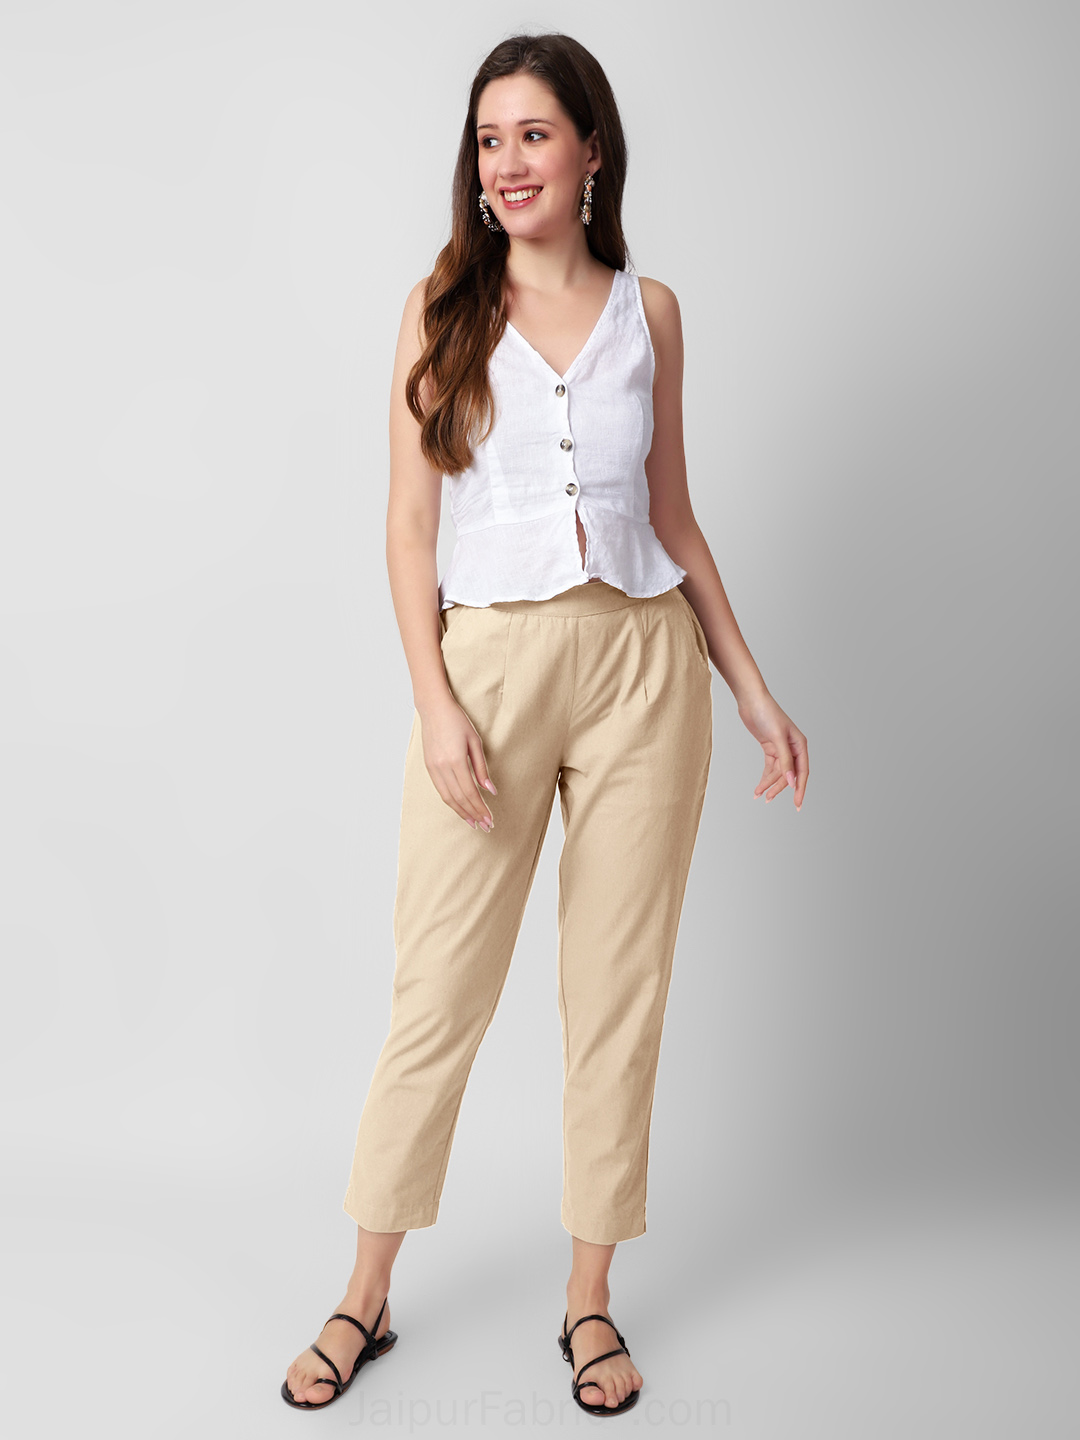 THE ALL NEW CLASSIC WIDE LEG 6 POCKET BEIGE CARGO JEANS FOR WOMENS NEW STYLE